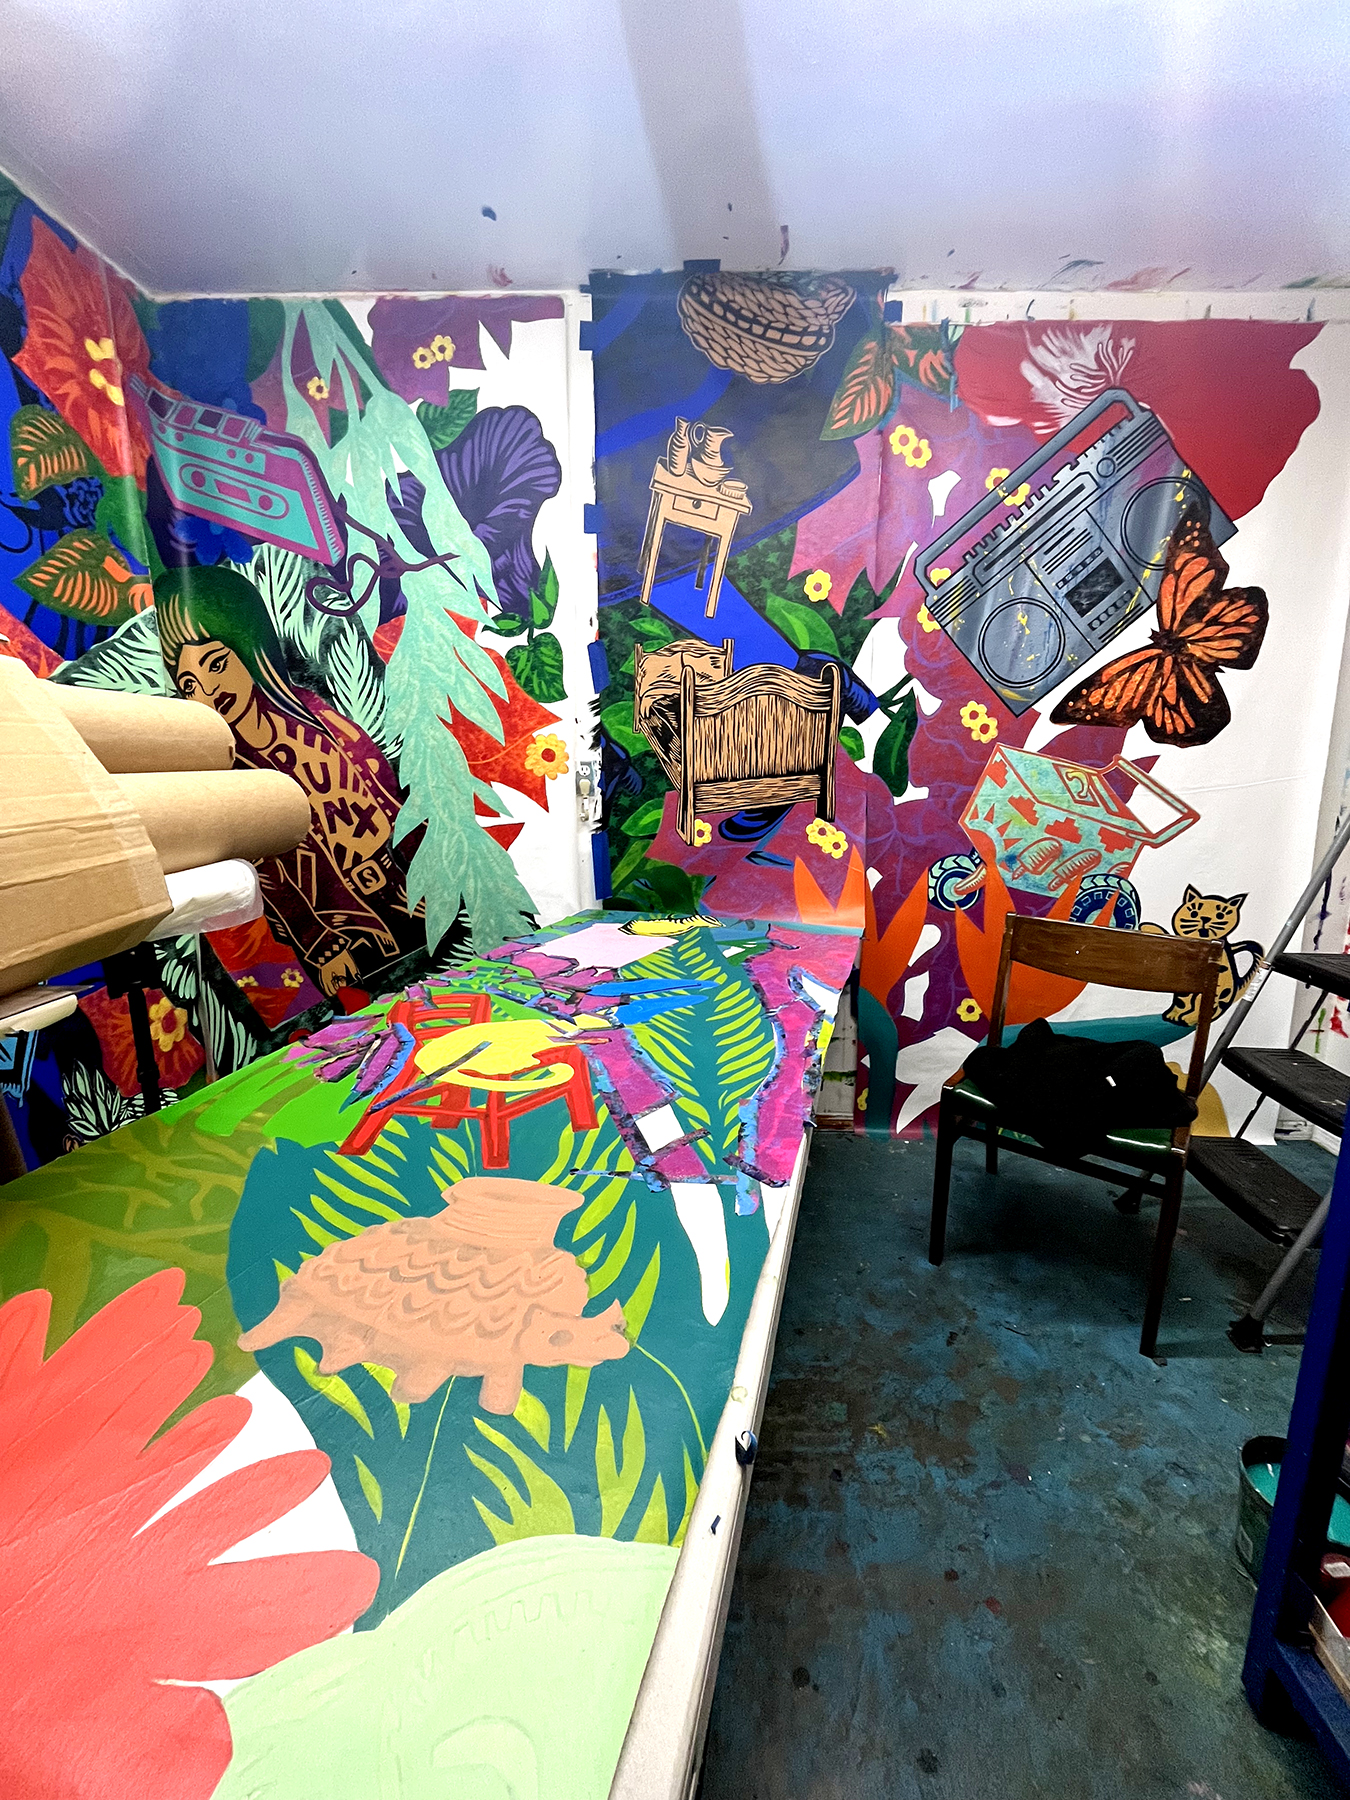 inside the artist's studio with colorful mural panels pinned to the wall